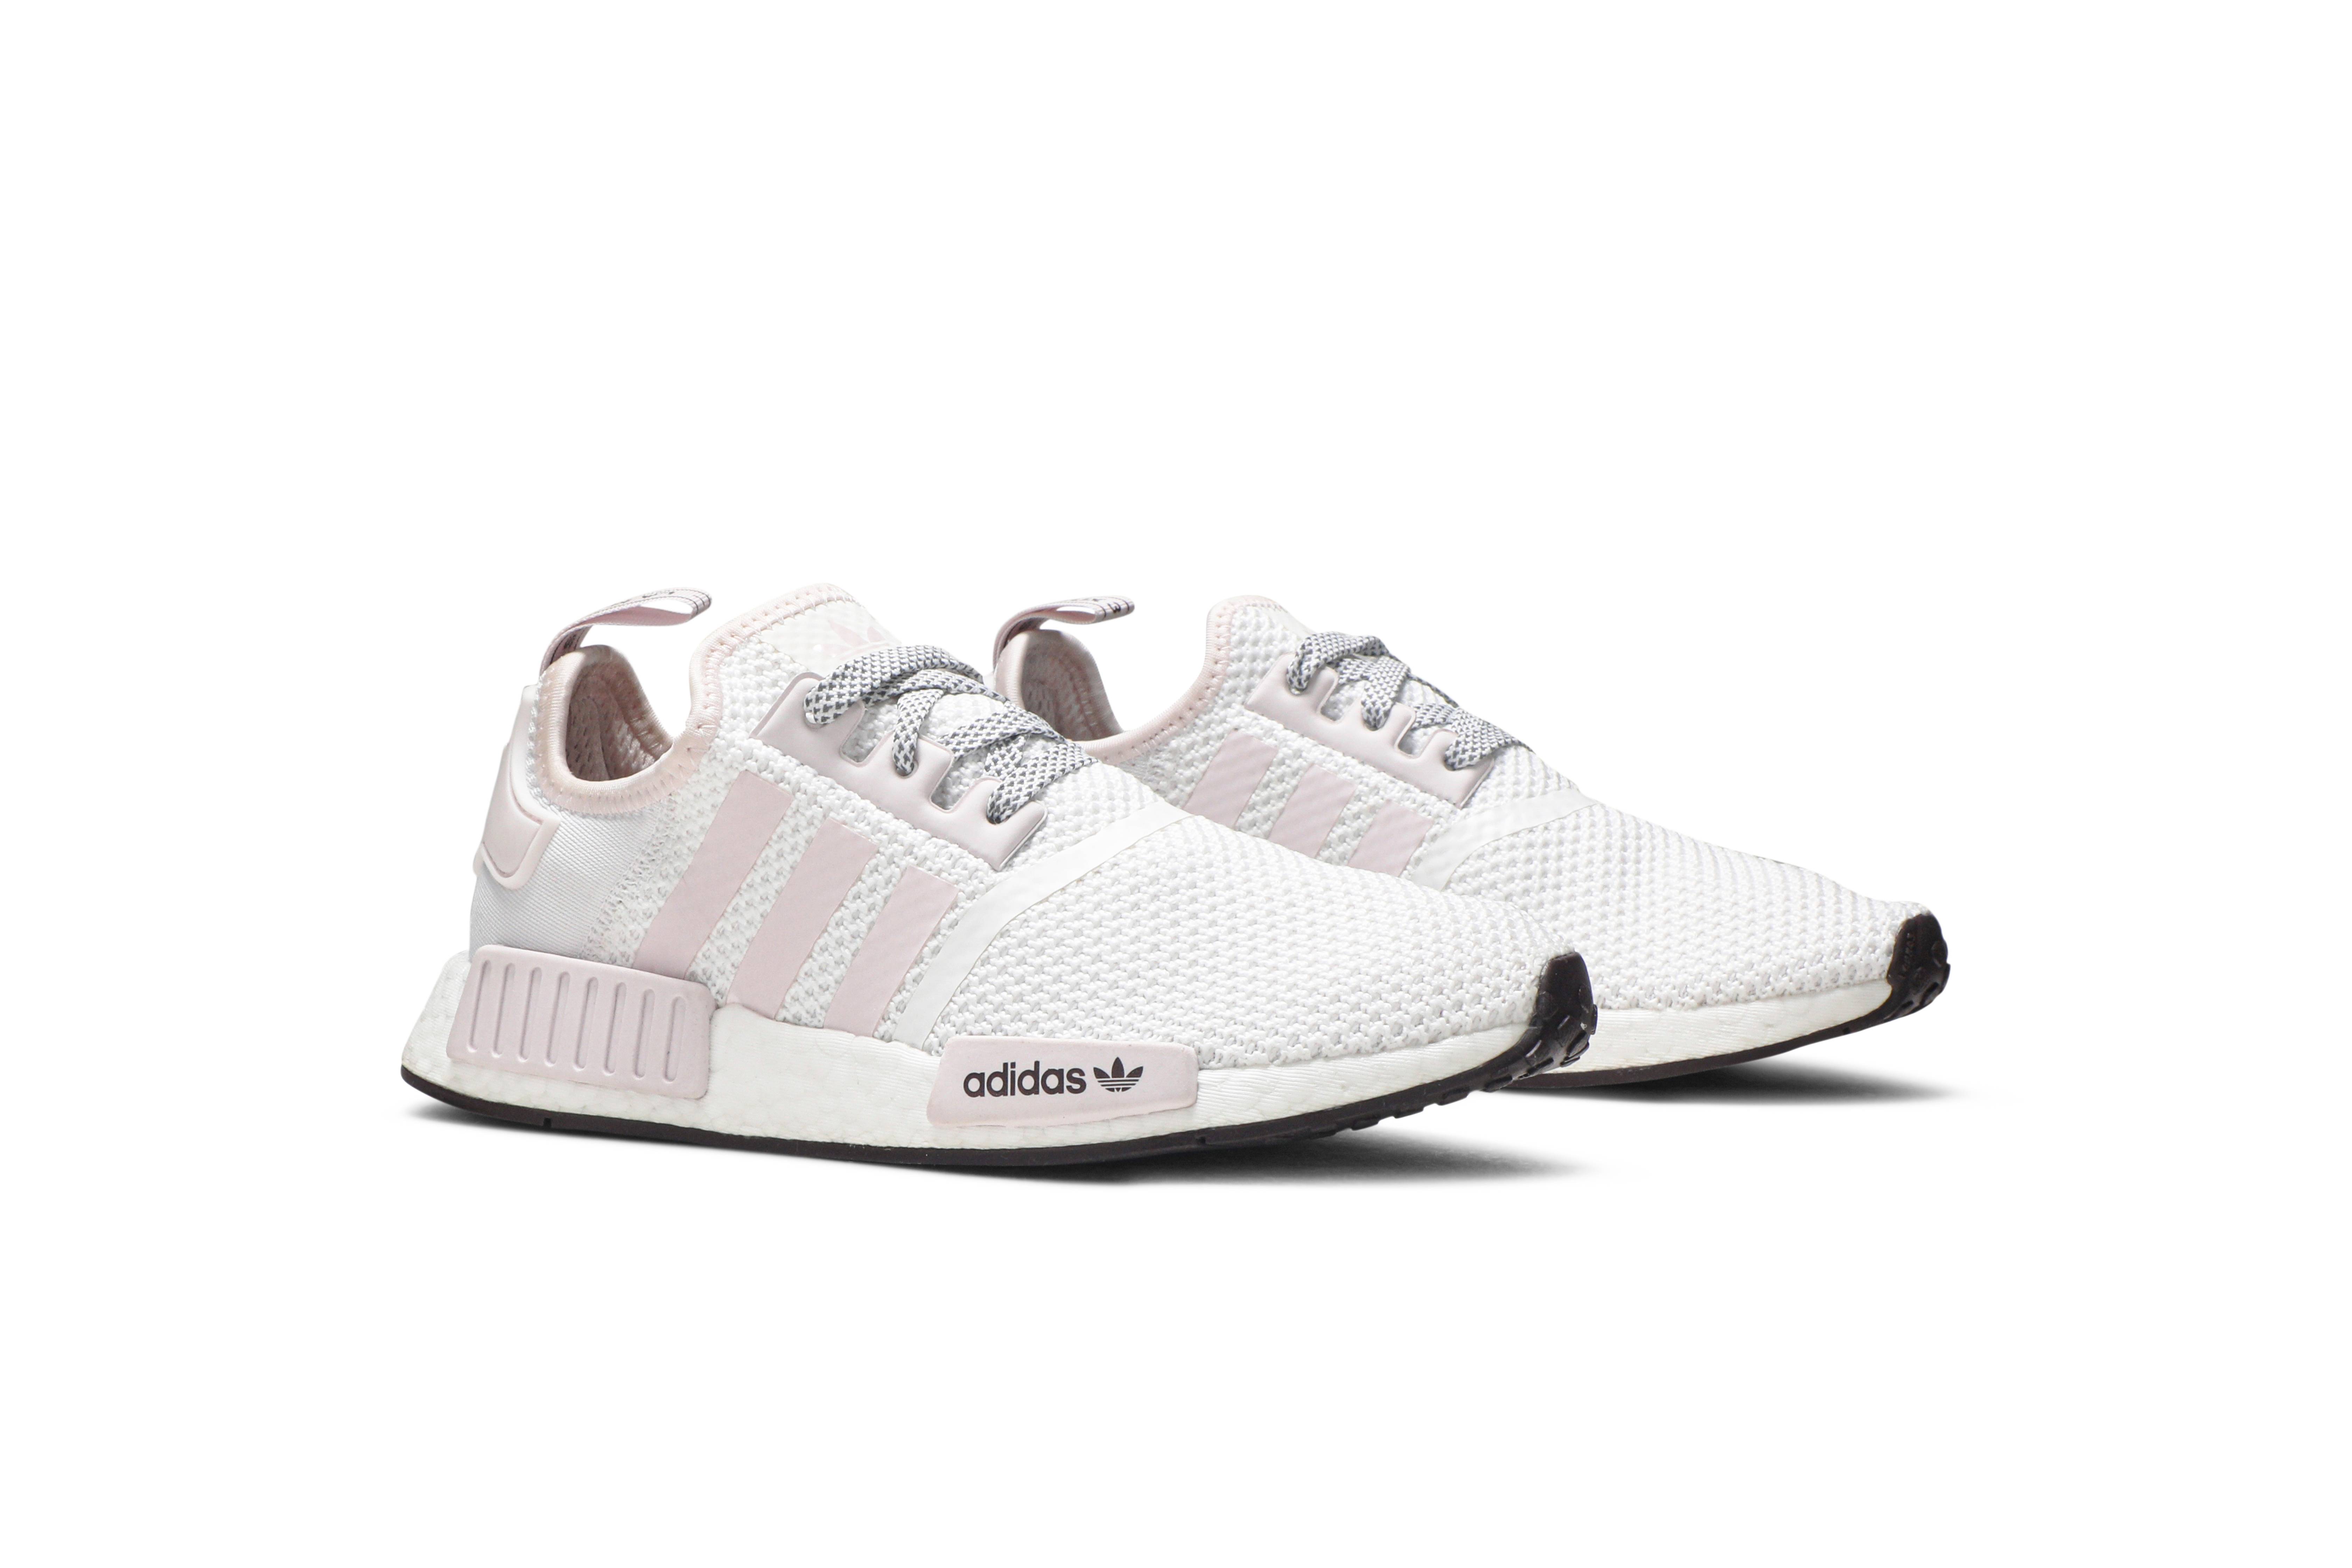 adidas nmd r1 cloud white orchid tint